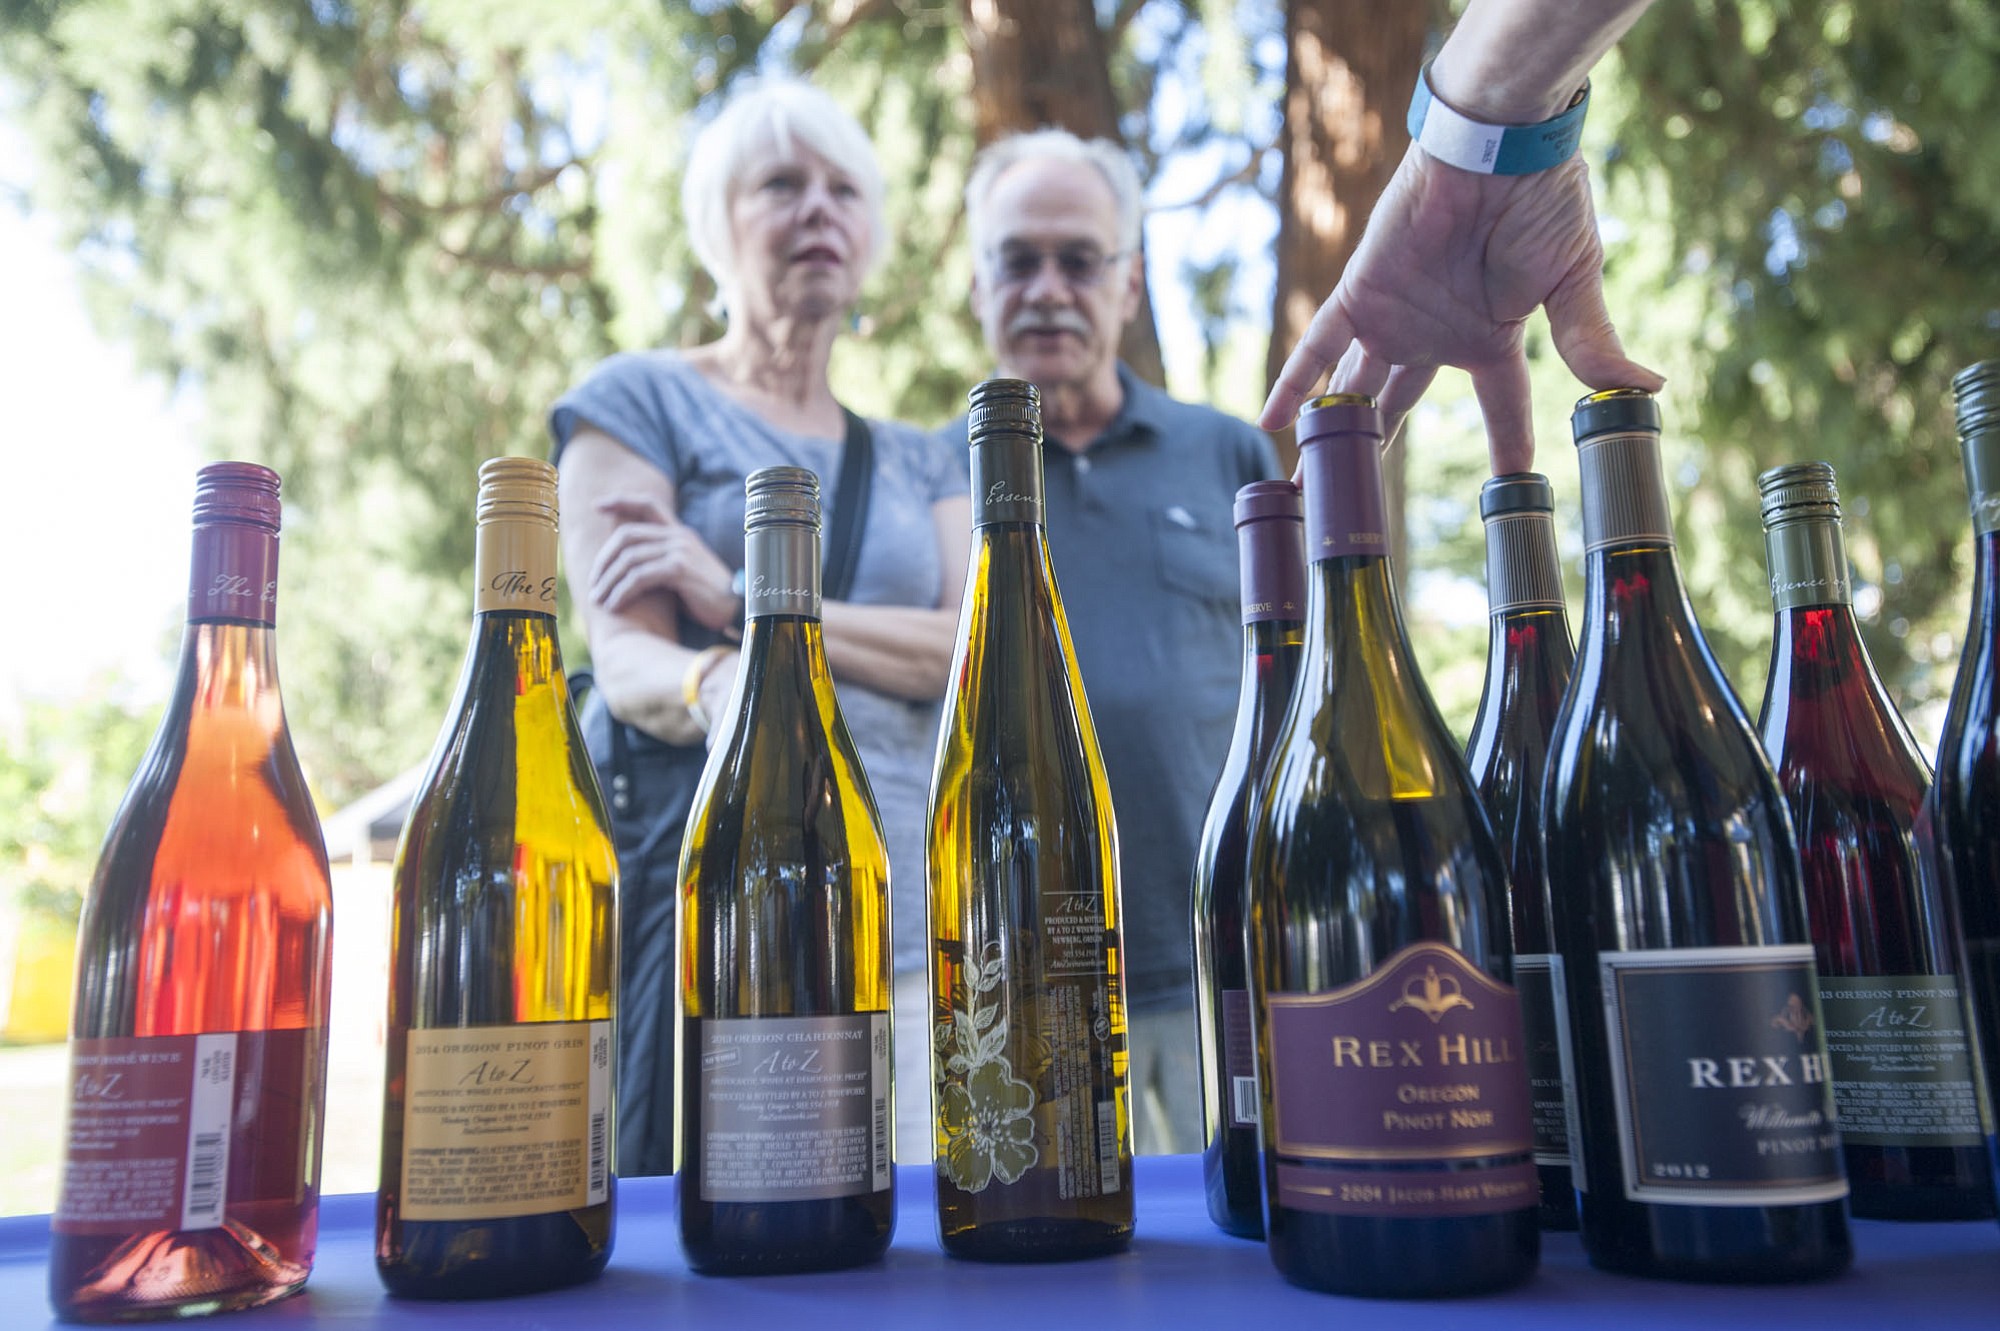 Leatha Tehennepe and Bill Hilleary pick out a wine at the Vancouver Wine and Jazz Festival at Esther Short Park in downtown Vancouver on Friday.